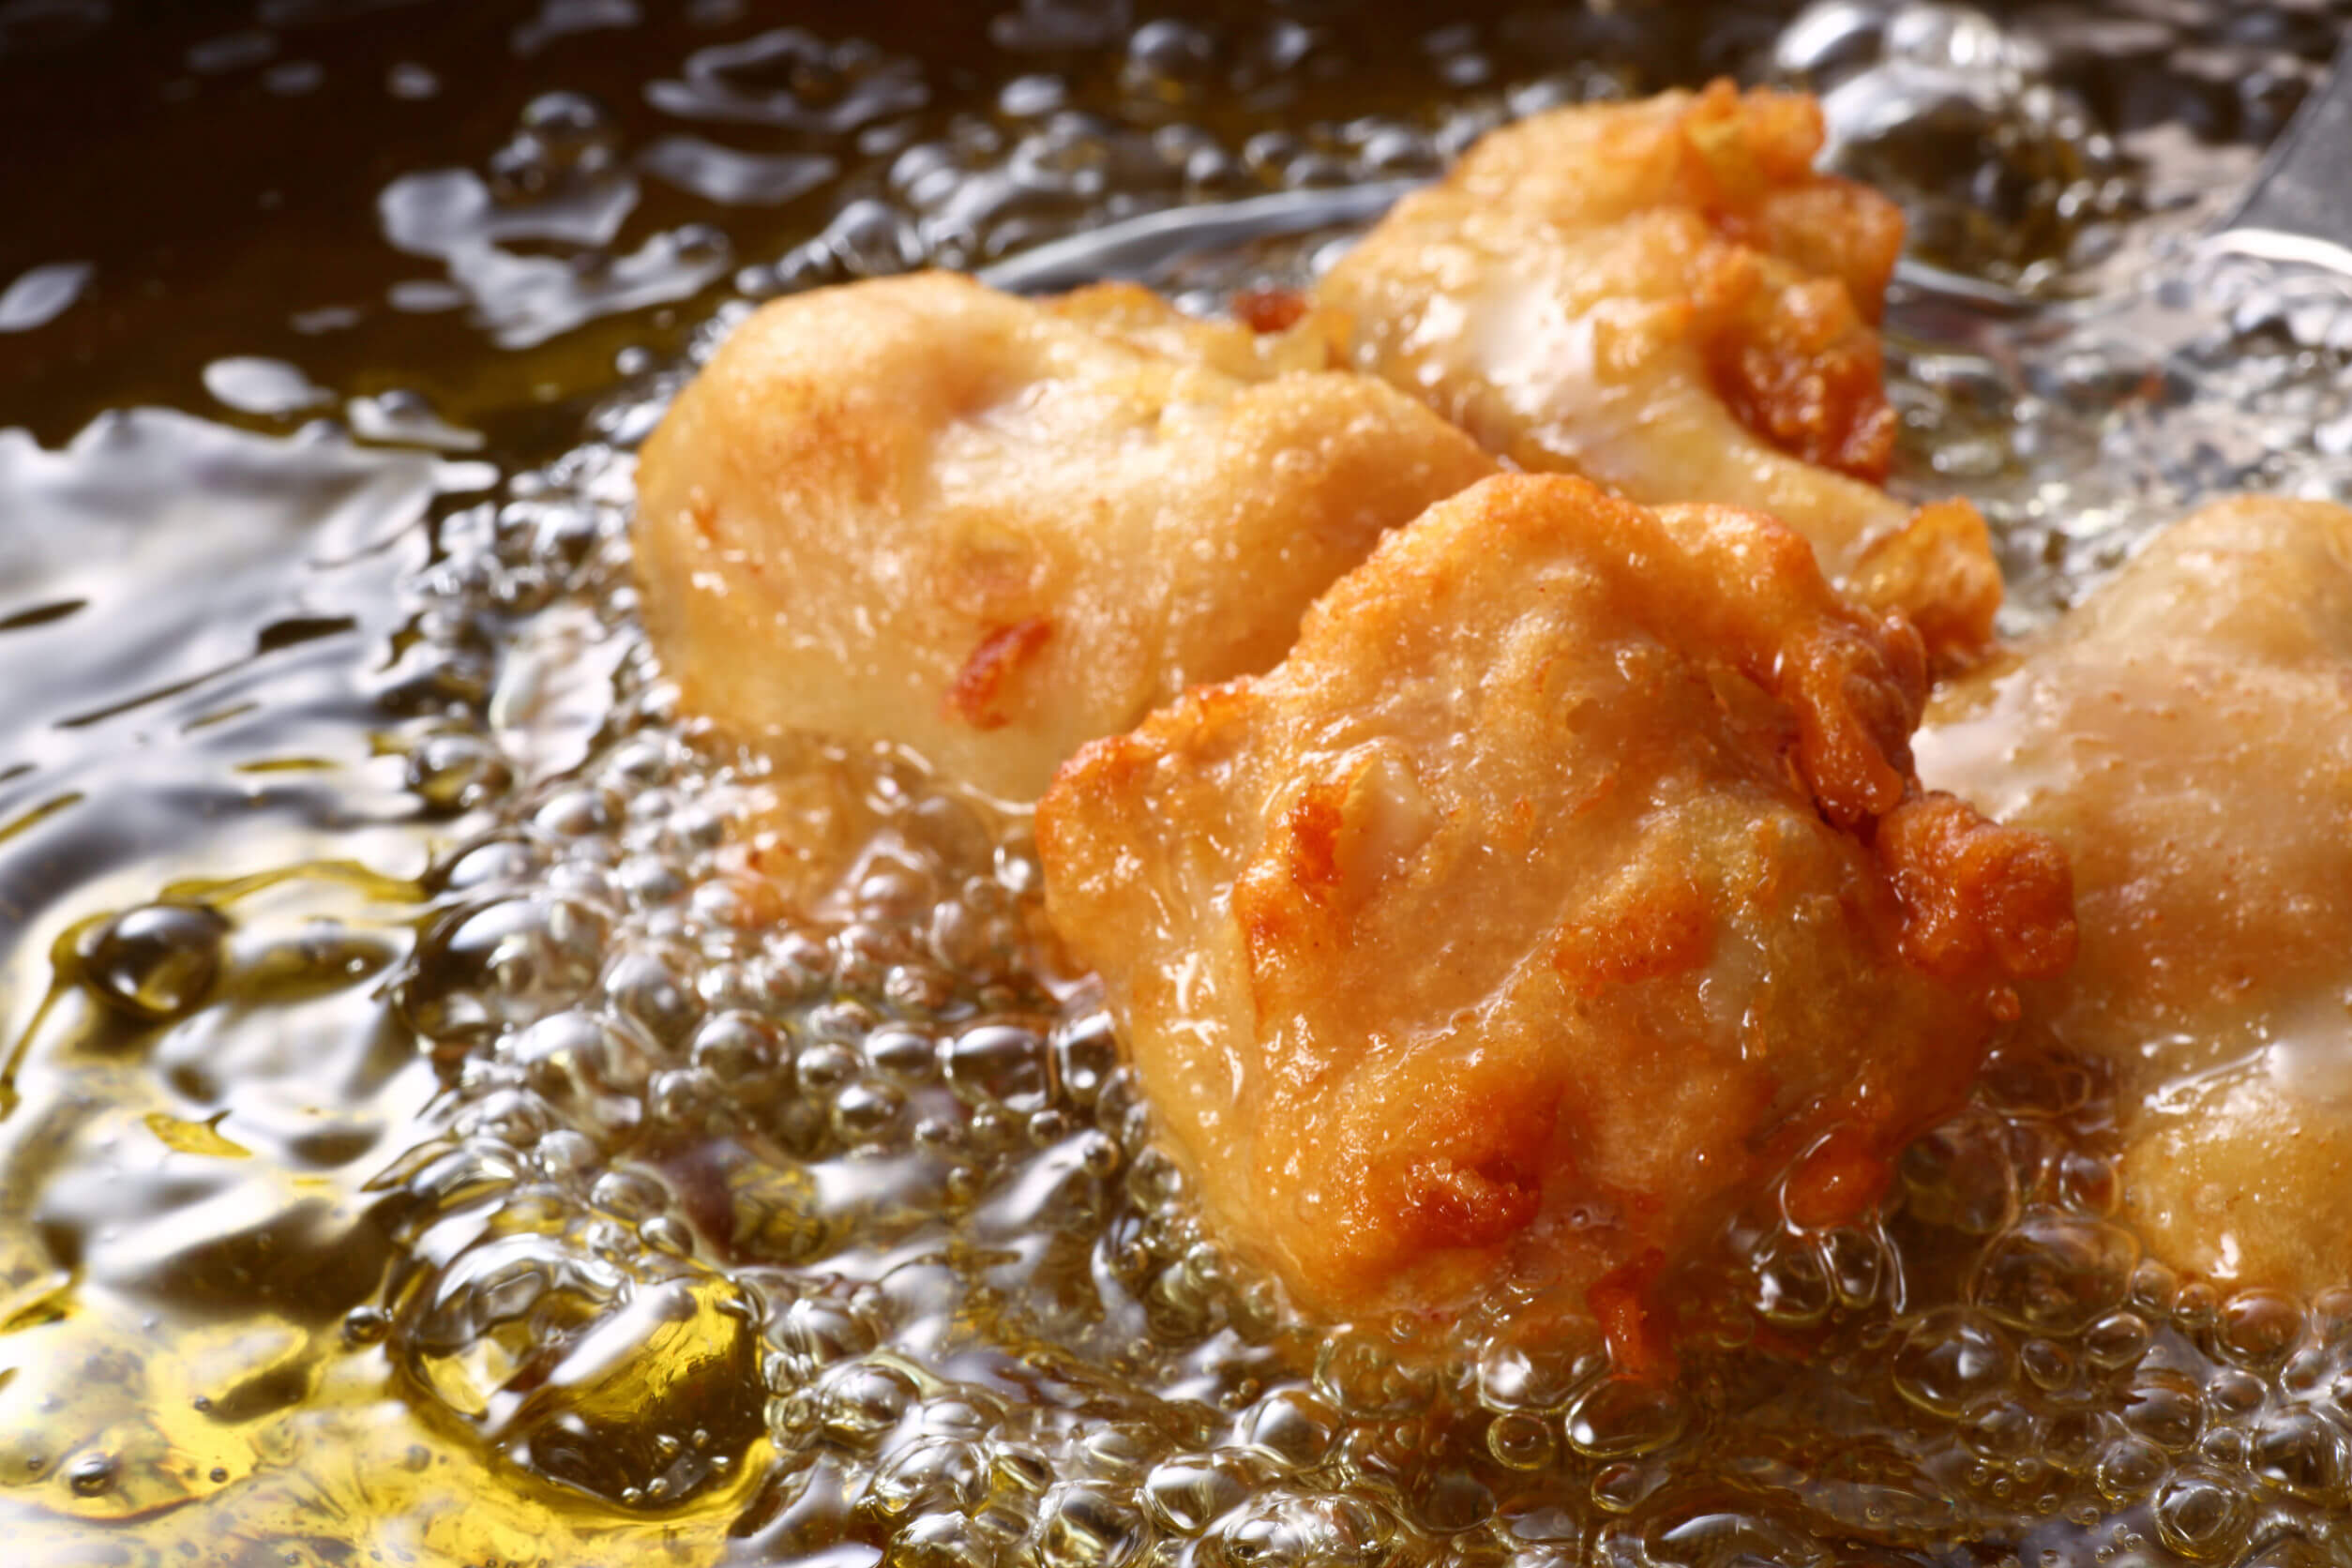 There are harmful types of fats in fried food.